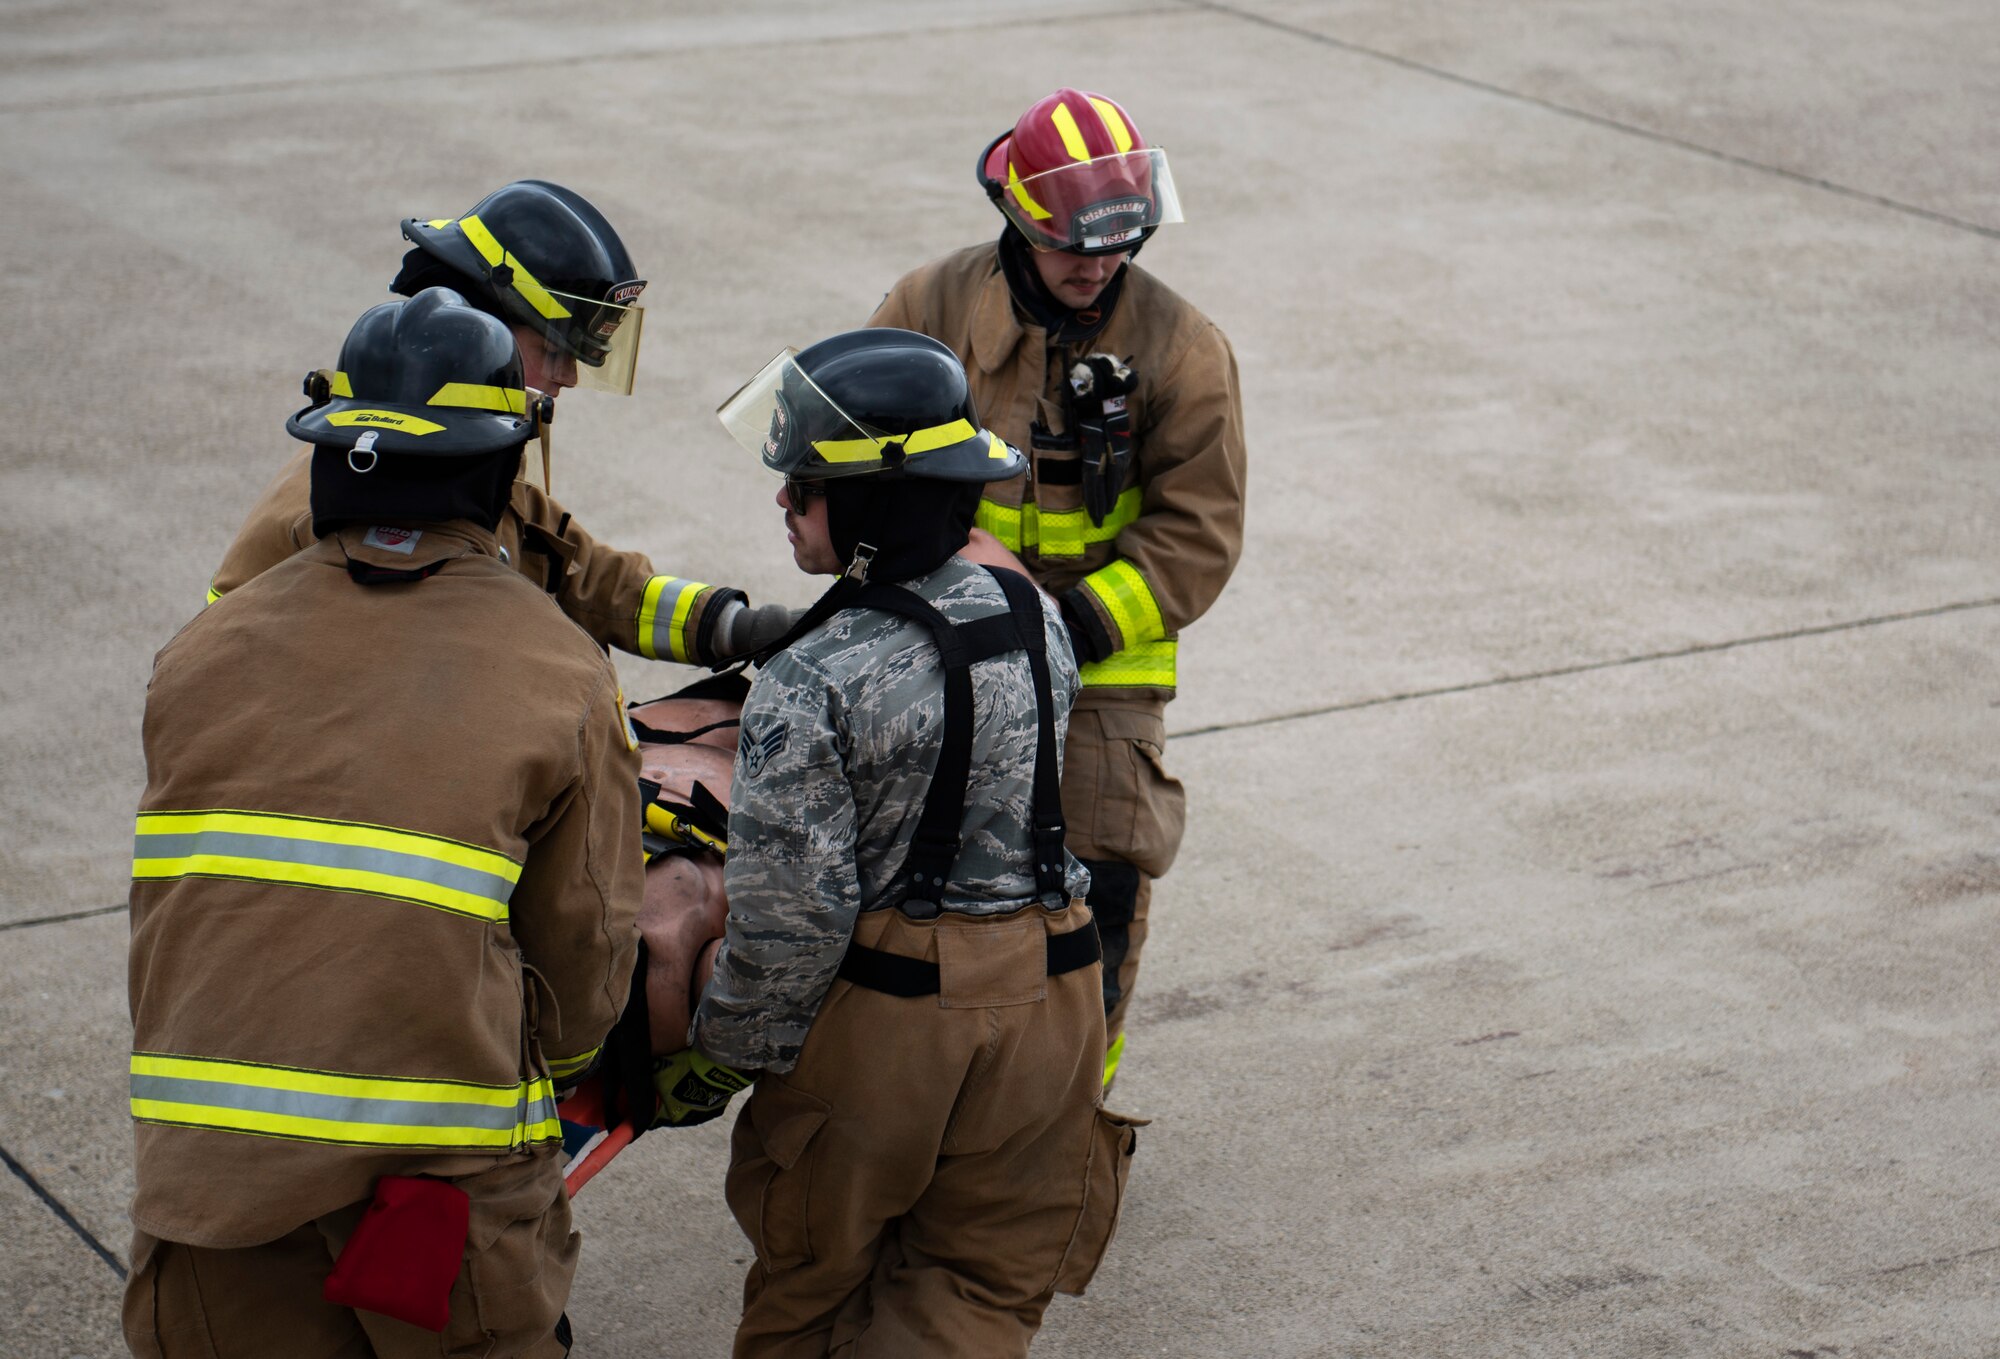 Fire fighters from the 8th Civil Engineer Squadron carry a mannequin simulating a fall victim at Kunsan Air Base, Republic of Korea, March 26, 2019. Fall victims can have various types of injuries that are not always visible so extra precaution is taken to not agitate any injuries. (U.S. Air Force phot by Senior Airman Stefan Alvarez)